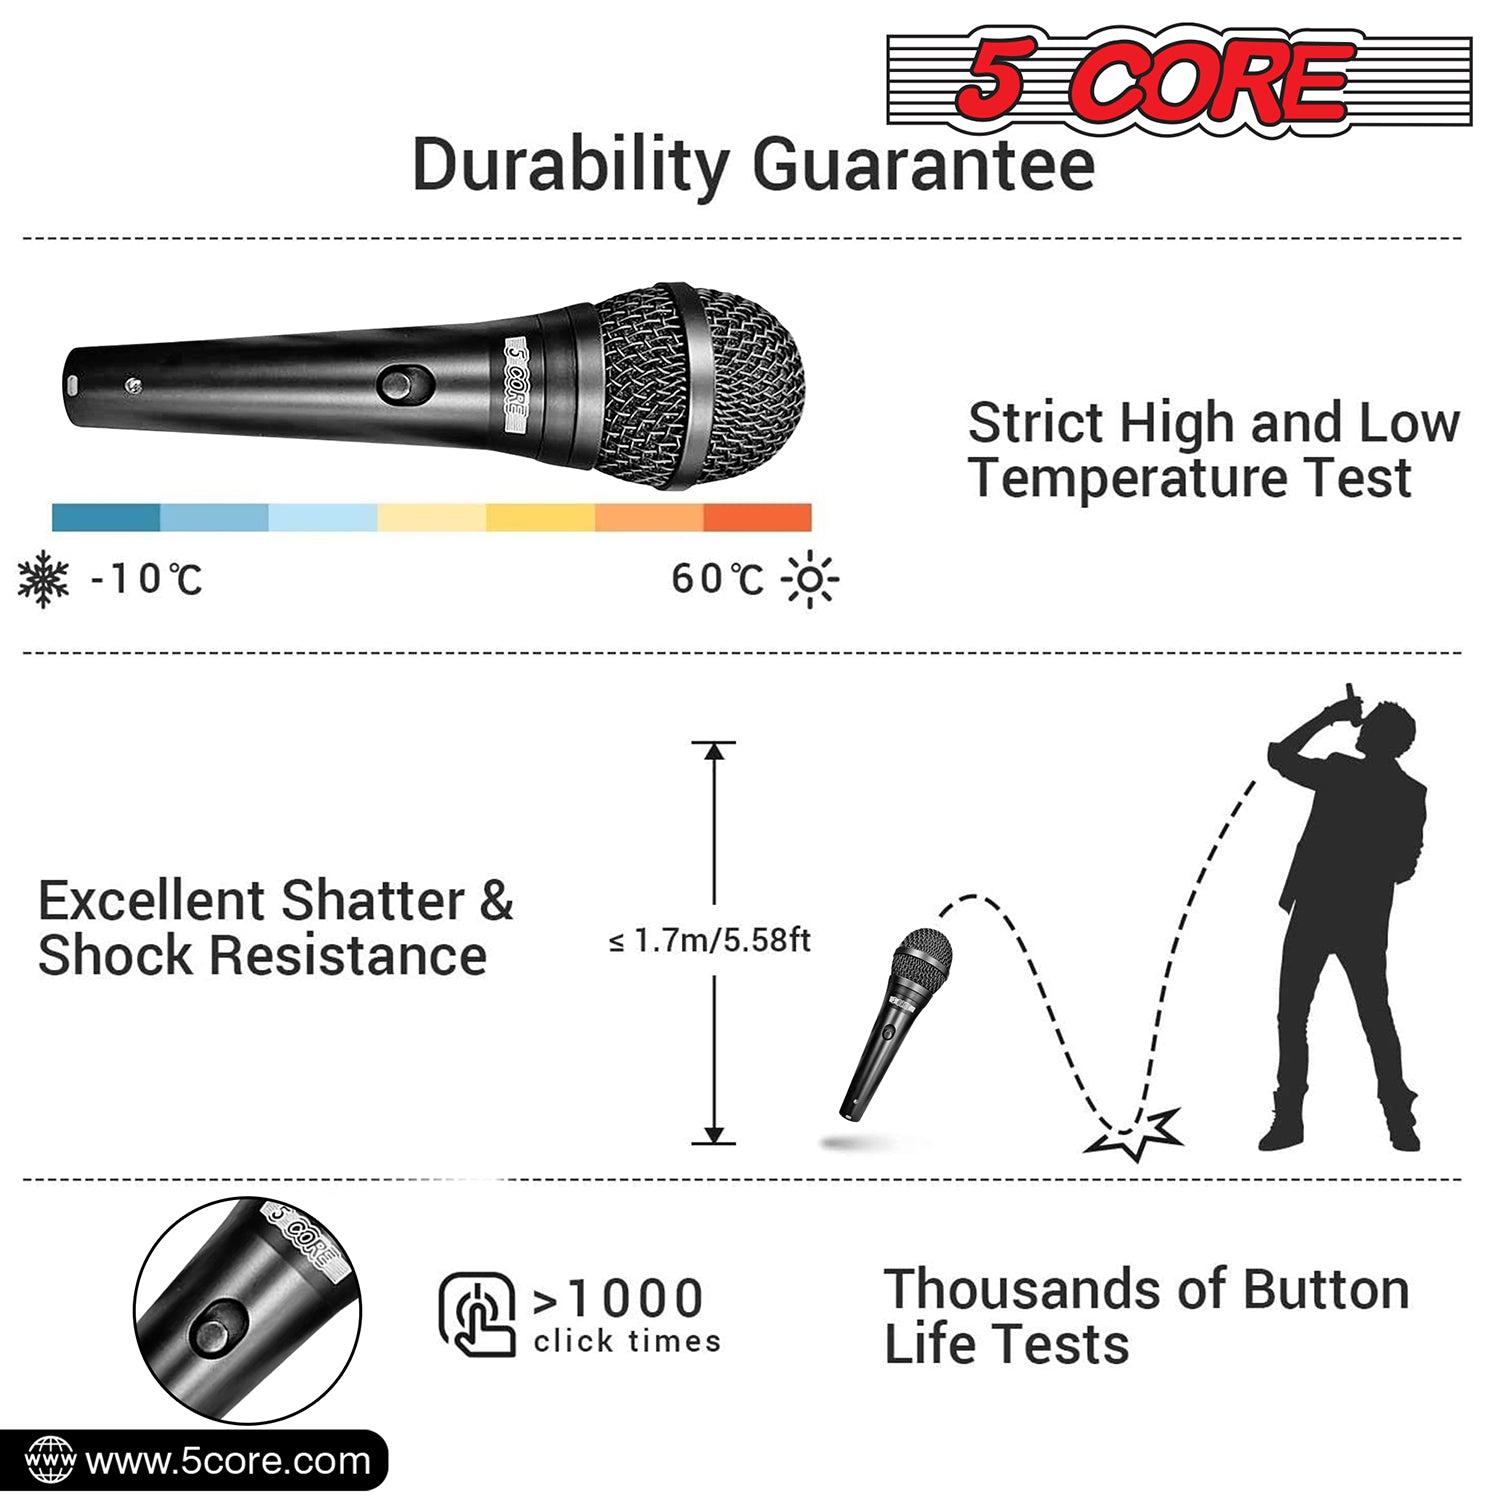 5Core Handheld Dynamic Microphone and Tripod Metal Stand Kit  w Unidirectional Vocal Wired XLR Mic